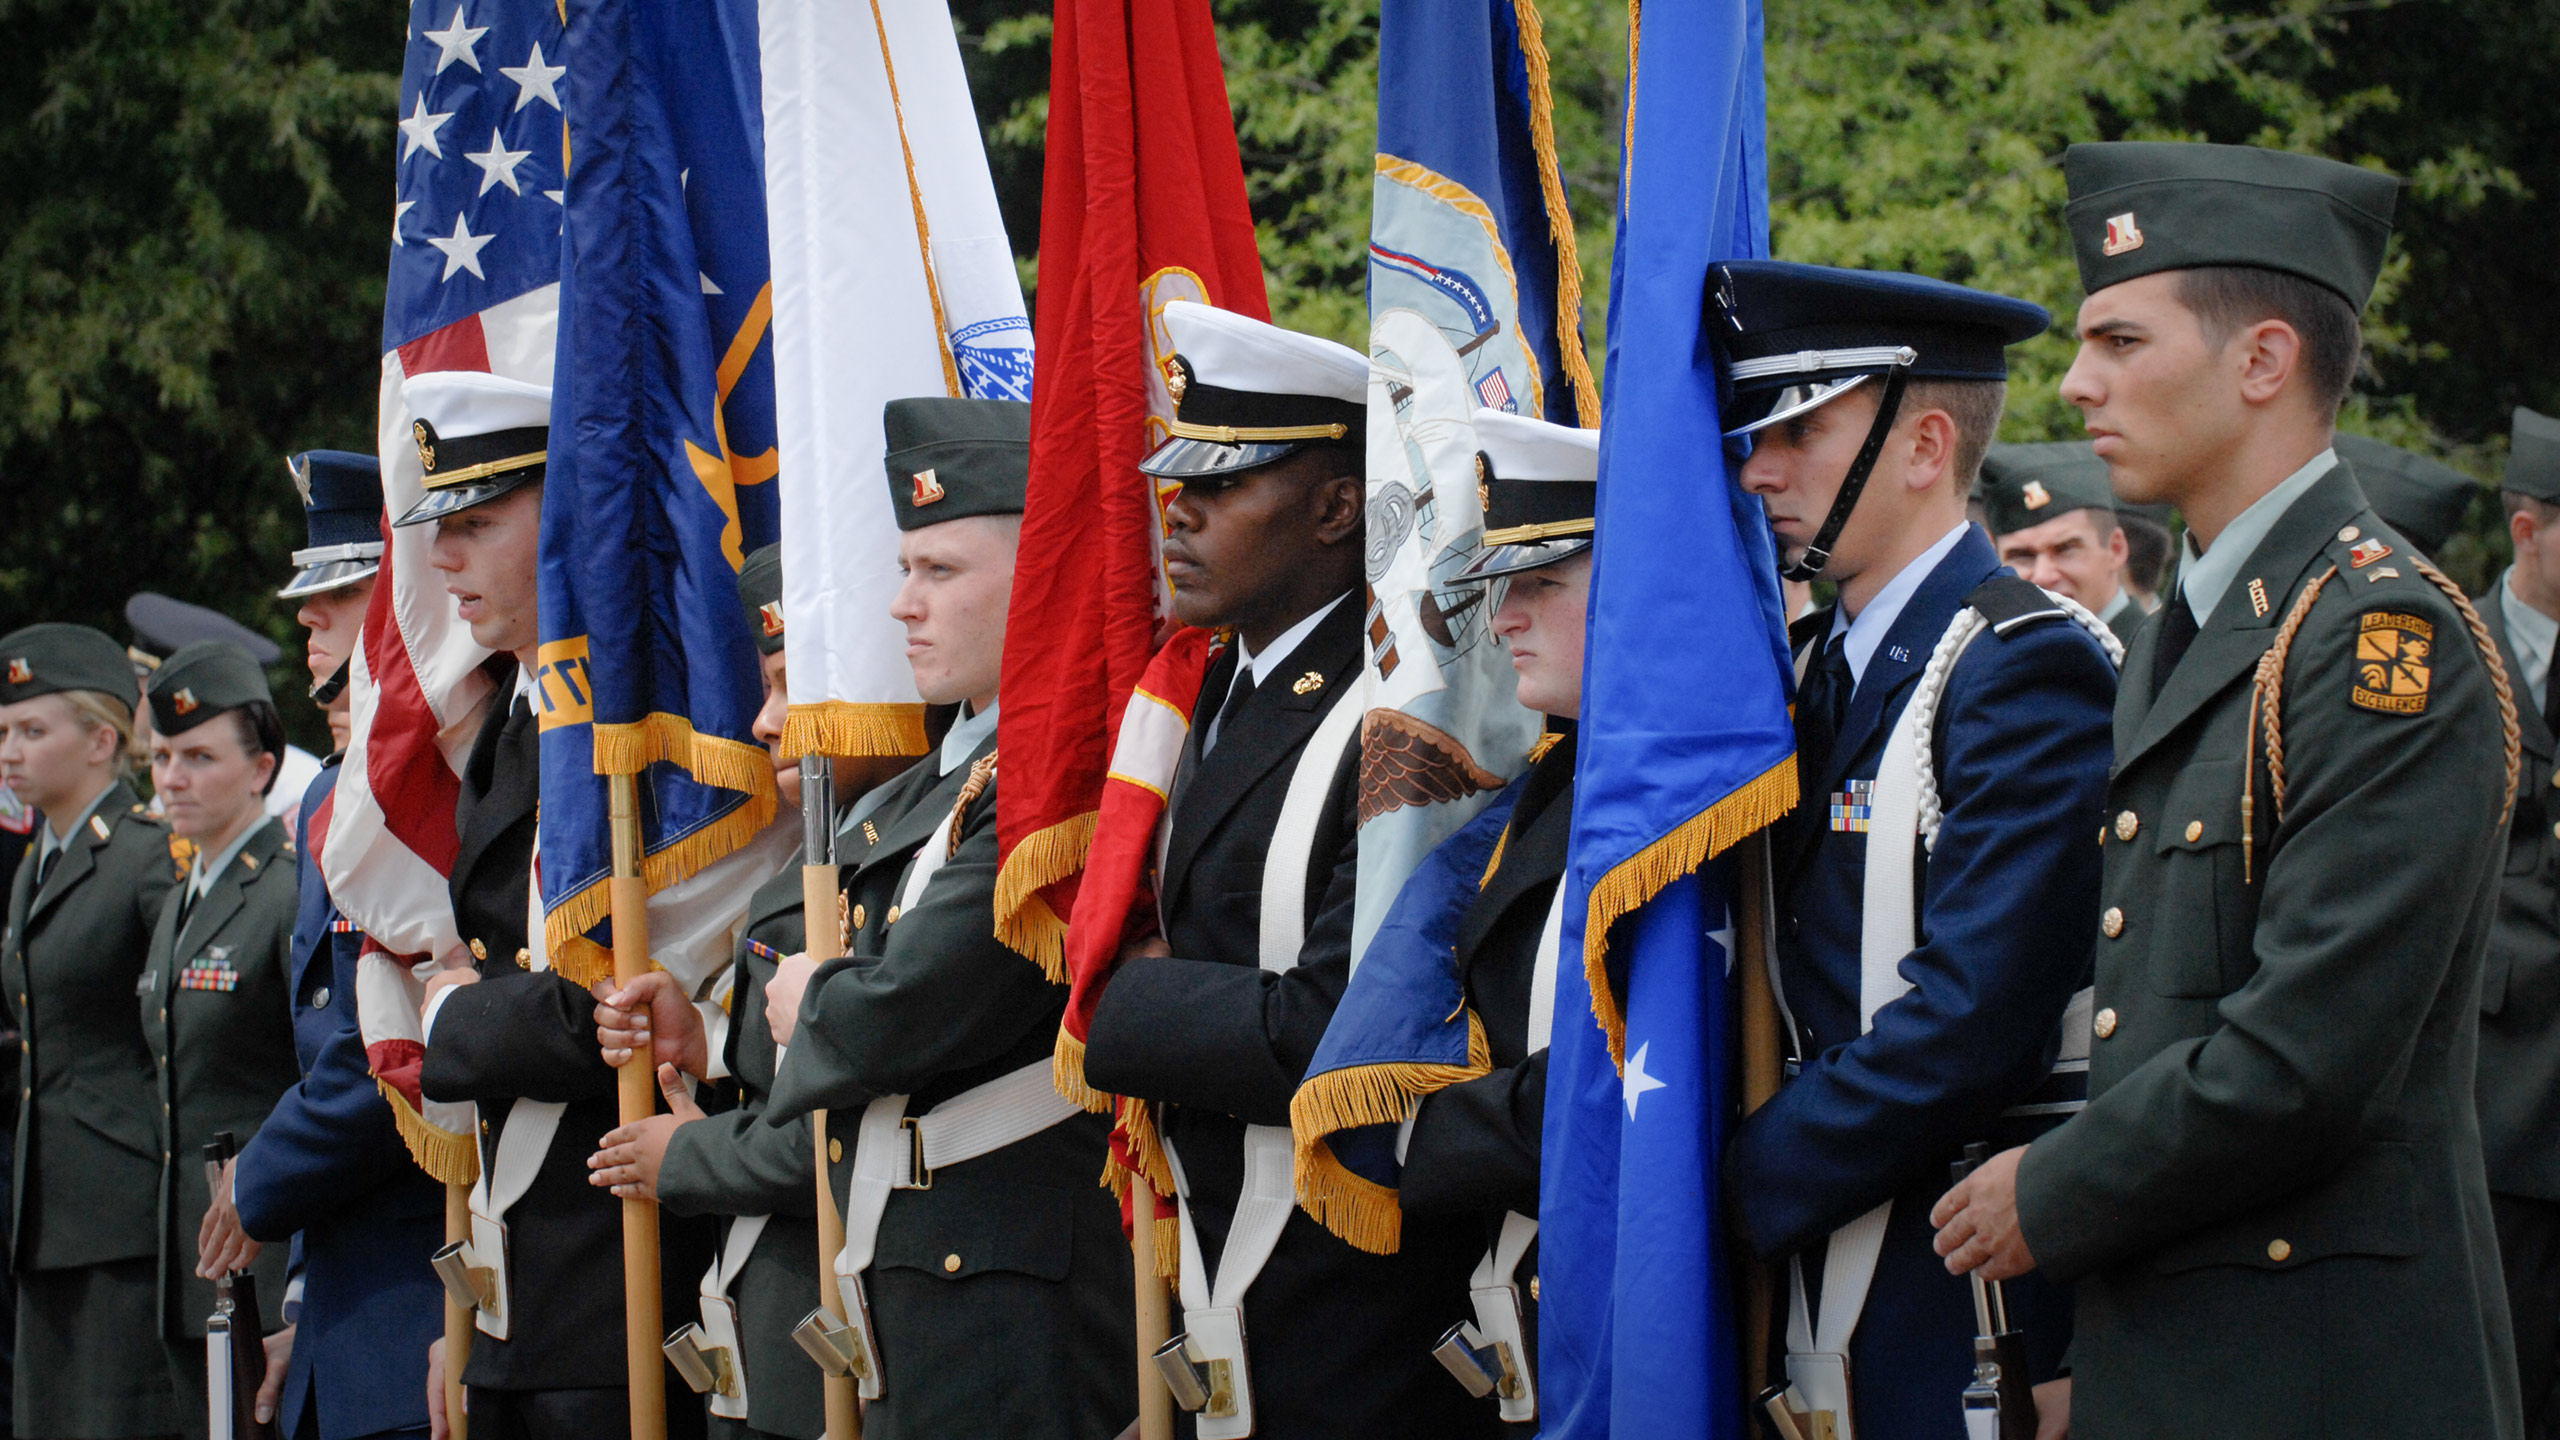 A line of military service members holding flags from the US and all brands of the military